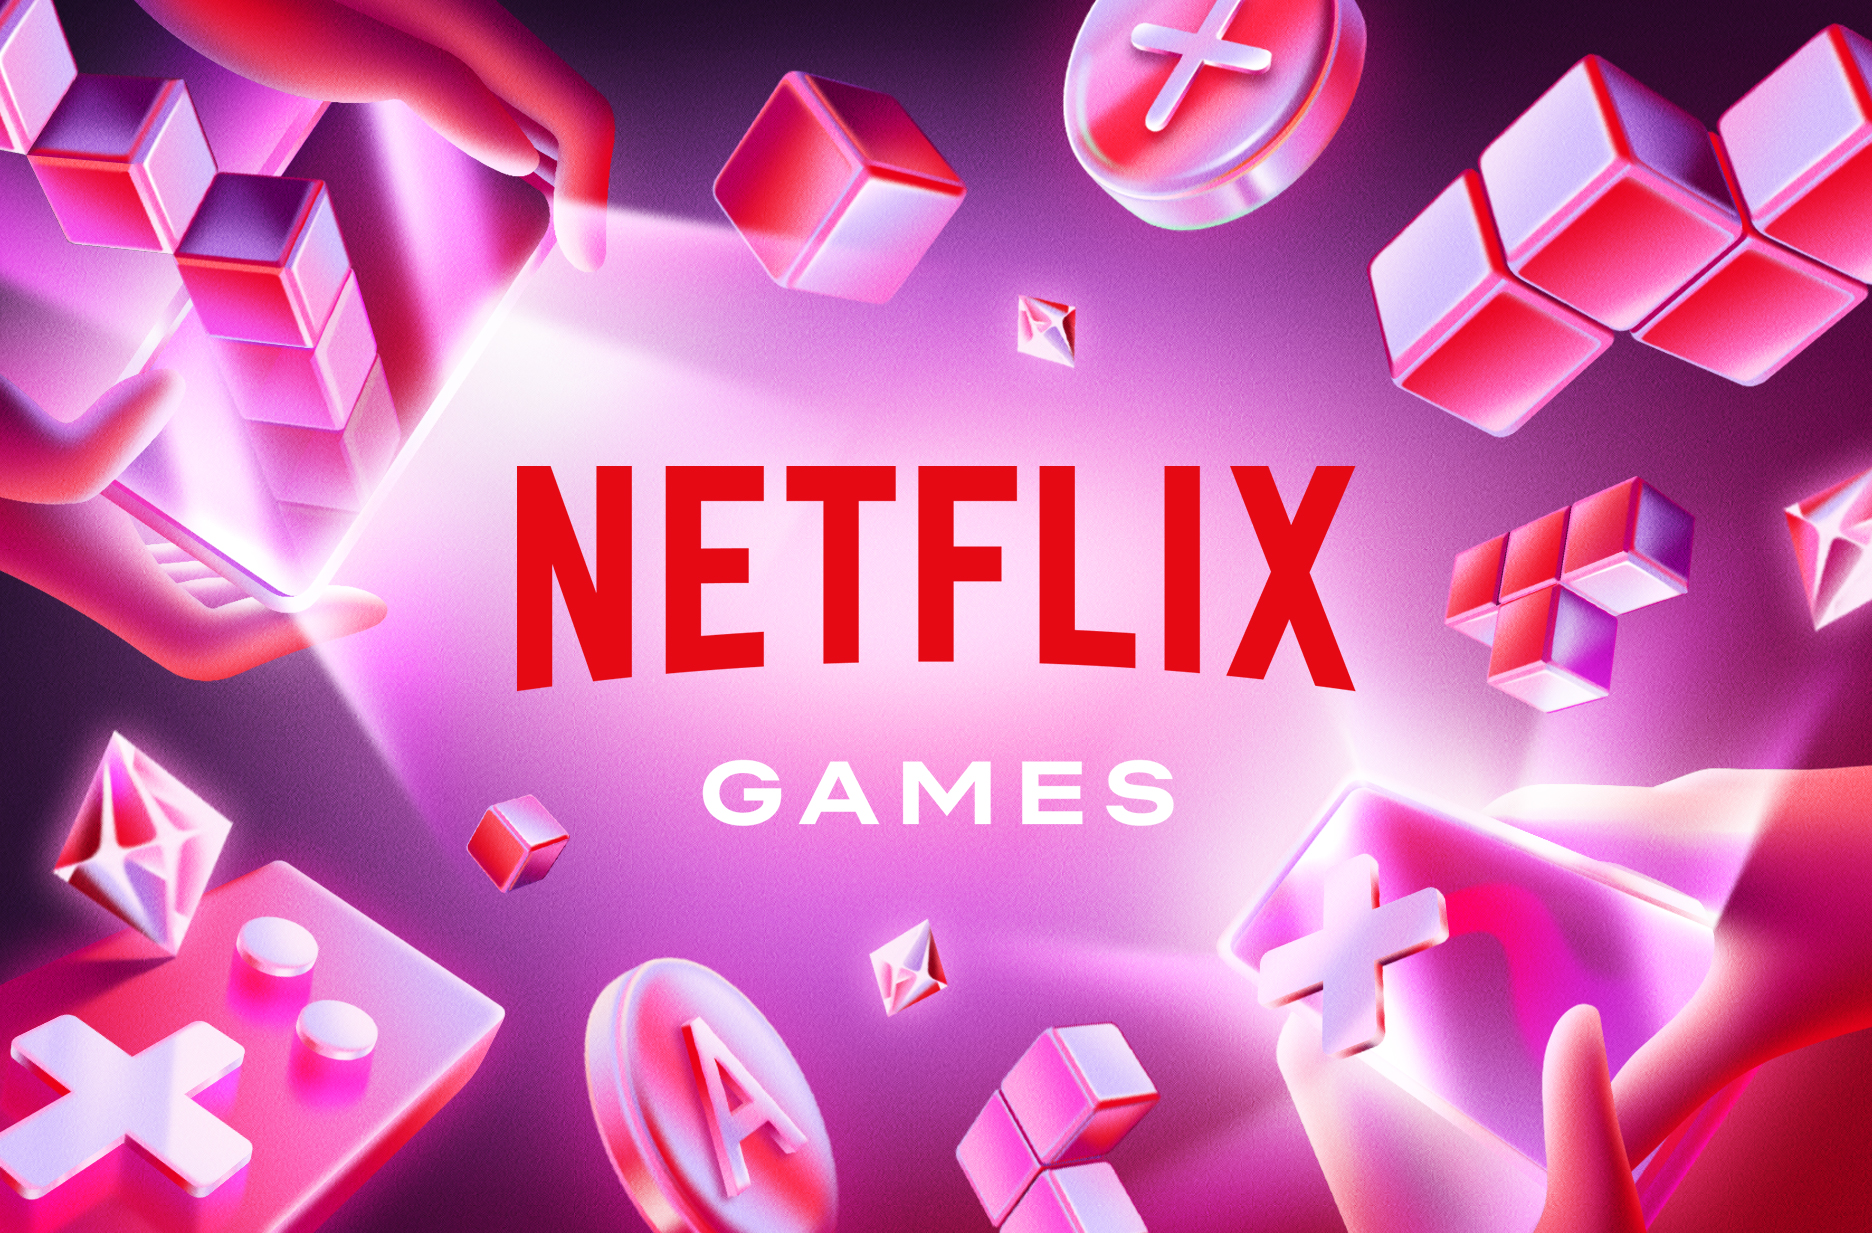 mobile games on netflix free : Exploring the Free Mobile Games on Netflix